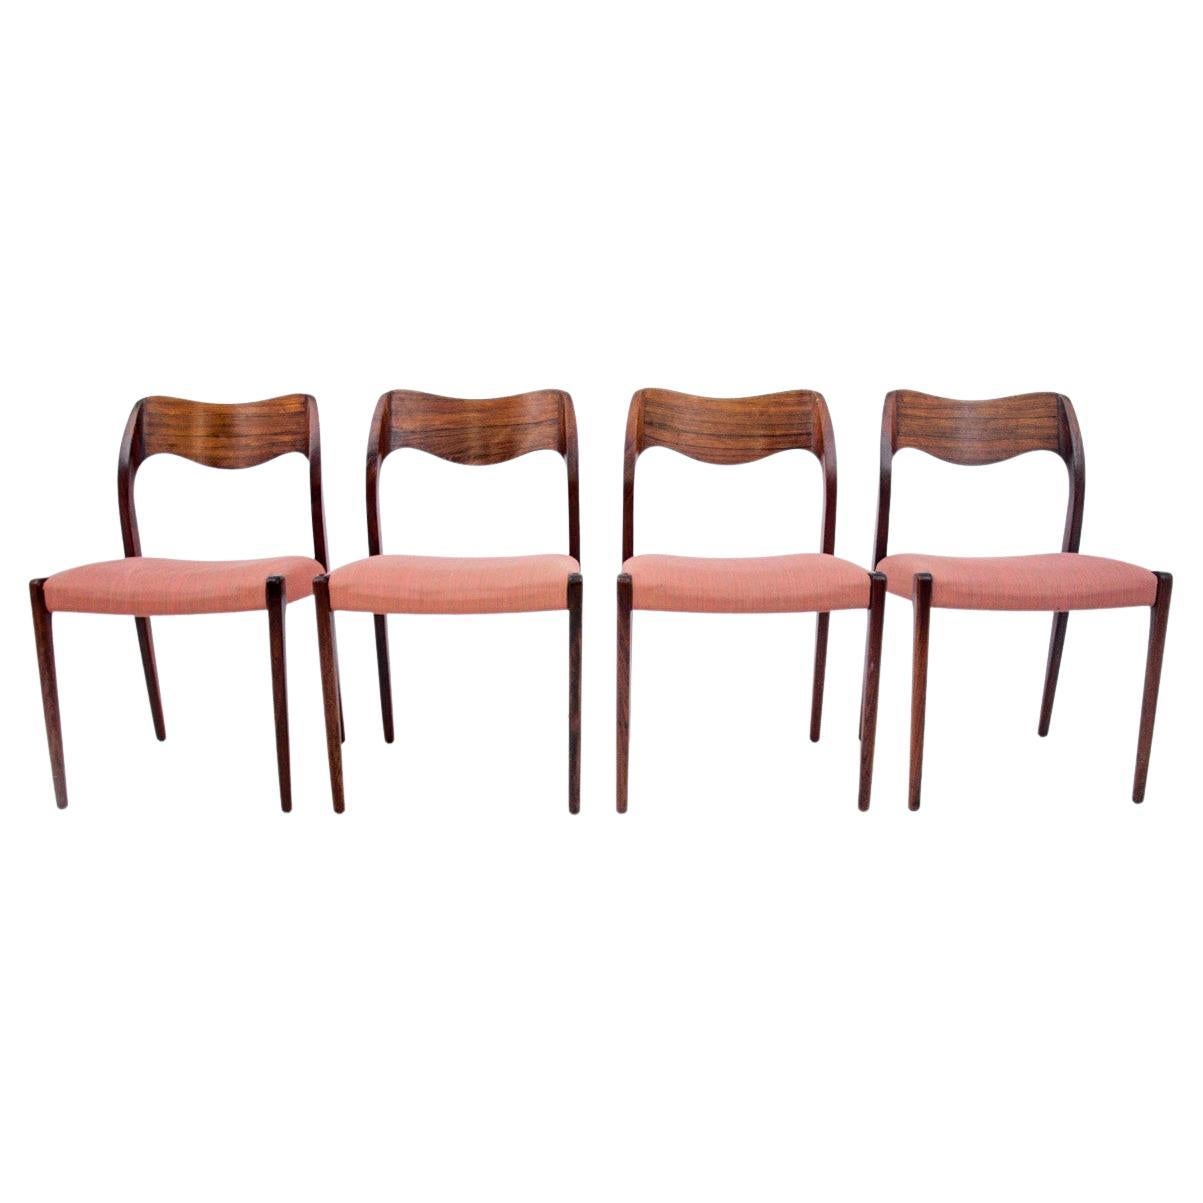 A set of chairs, Danish design, 1960s. Very good condition.

Niels O. Møller, model 71

Dimensions: height 78 cm / height of the seat. 46 cm / width 50 cm / Dep. 45 cm.